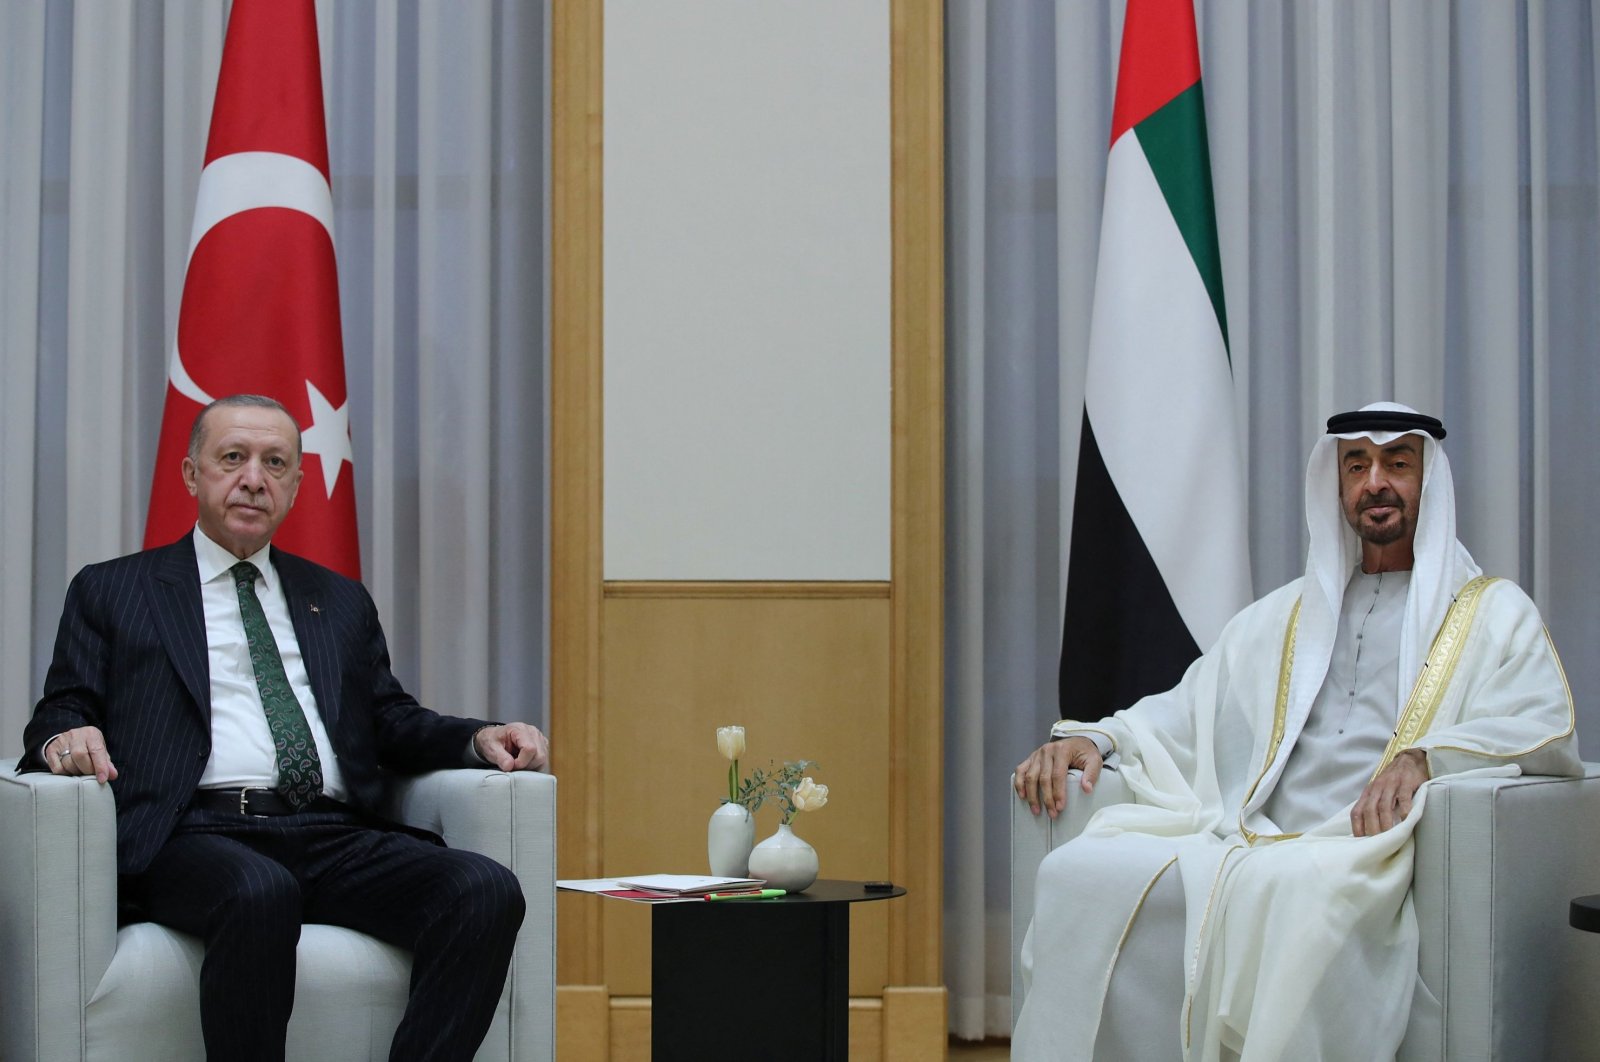 This handout picture released on Feb. 14, 2022, by the Turkish Presidential Office shows President Recep Tayyip Erdoğan (L) meeting with Abu Dhabi Crown Prince Sheikh Mohammed bin Zayed Al Nahyan during an official ceremony in Abu Dhabi, UAE. (AFP Photo)